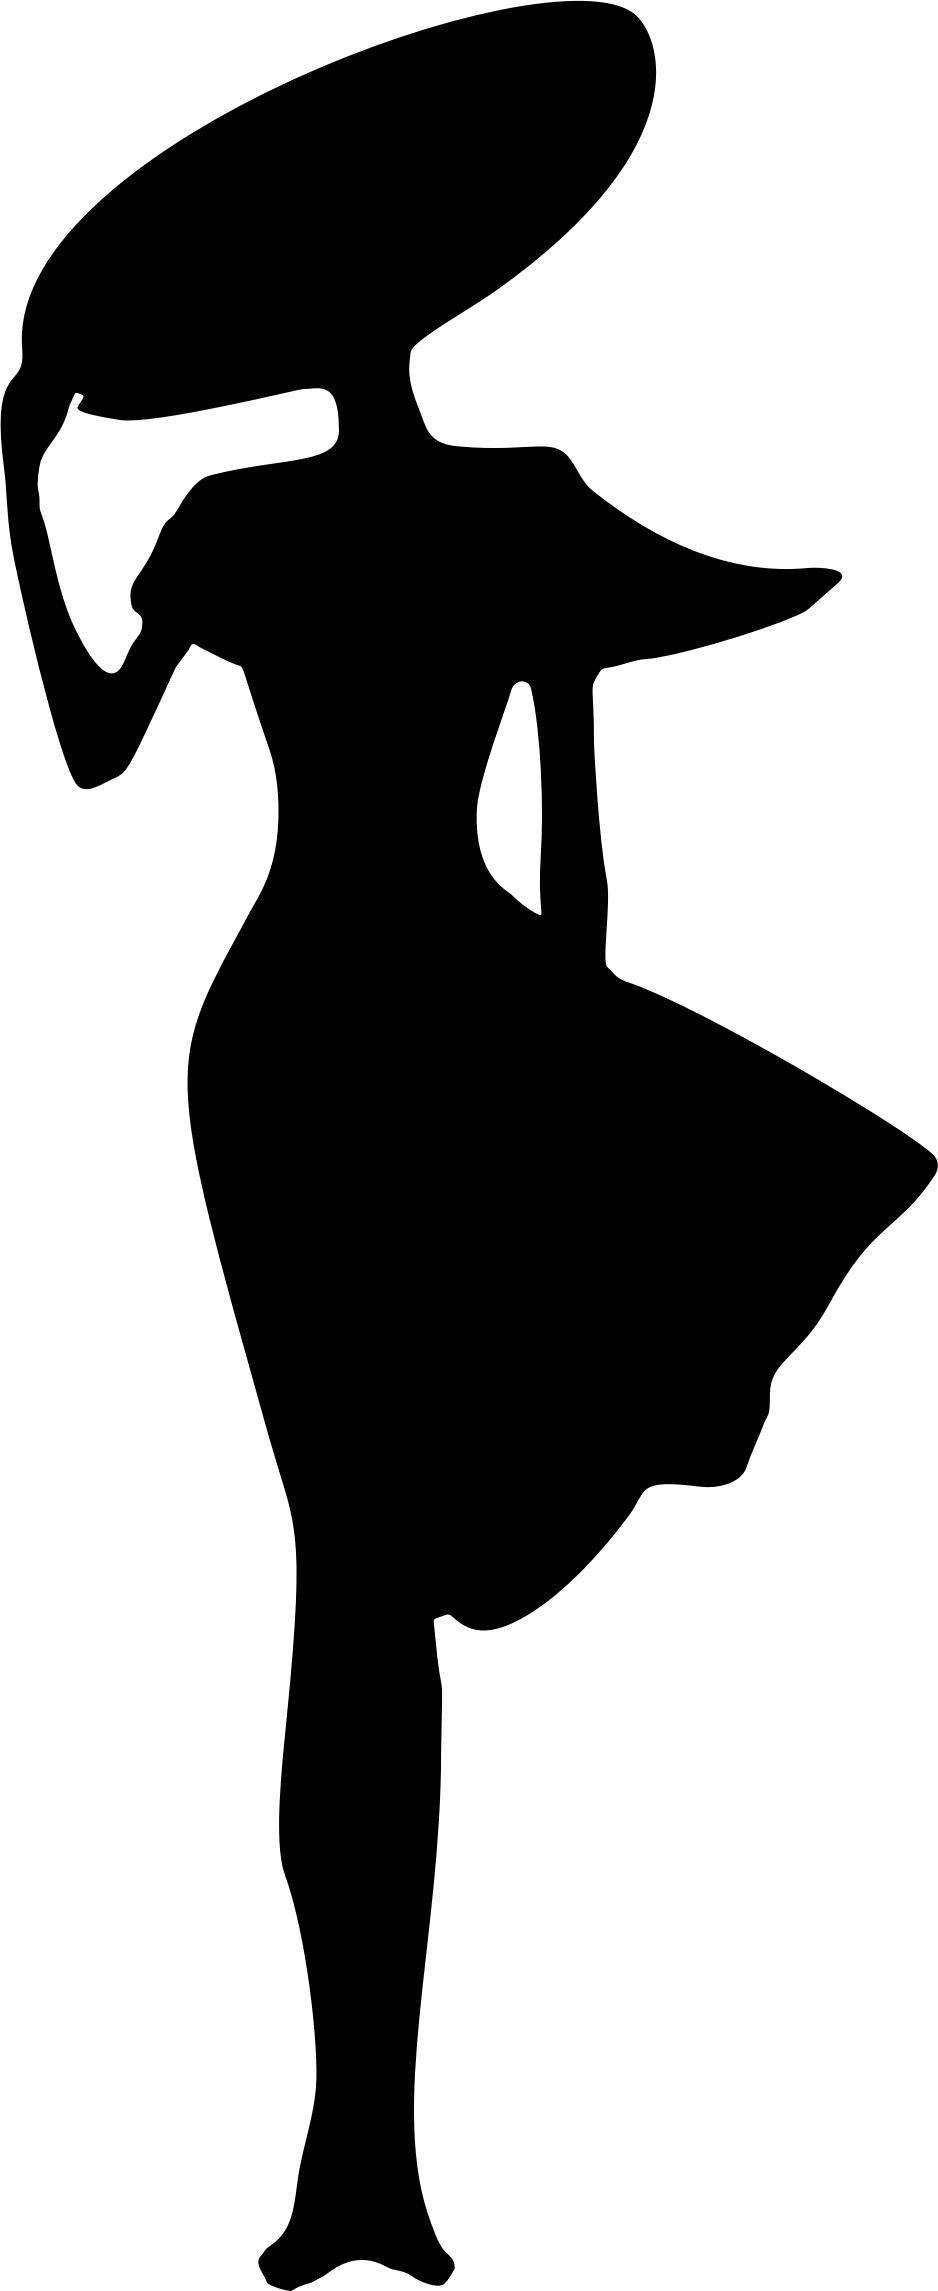 Woman In The Wind Silhouette png transparent